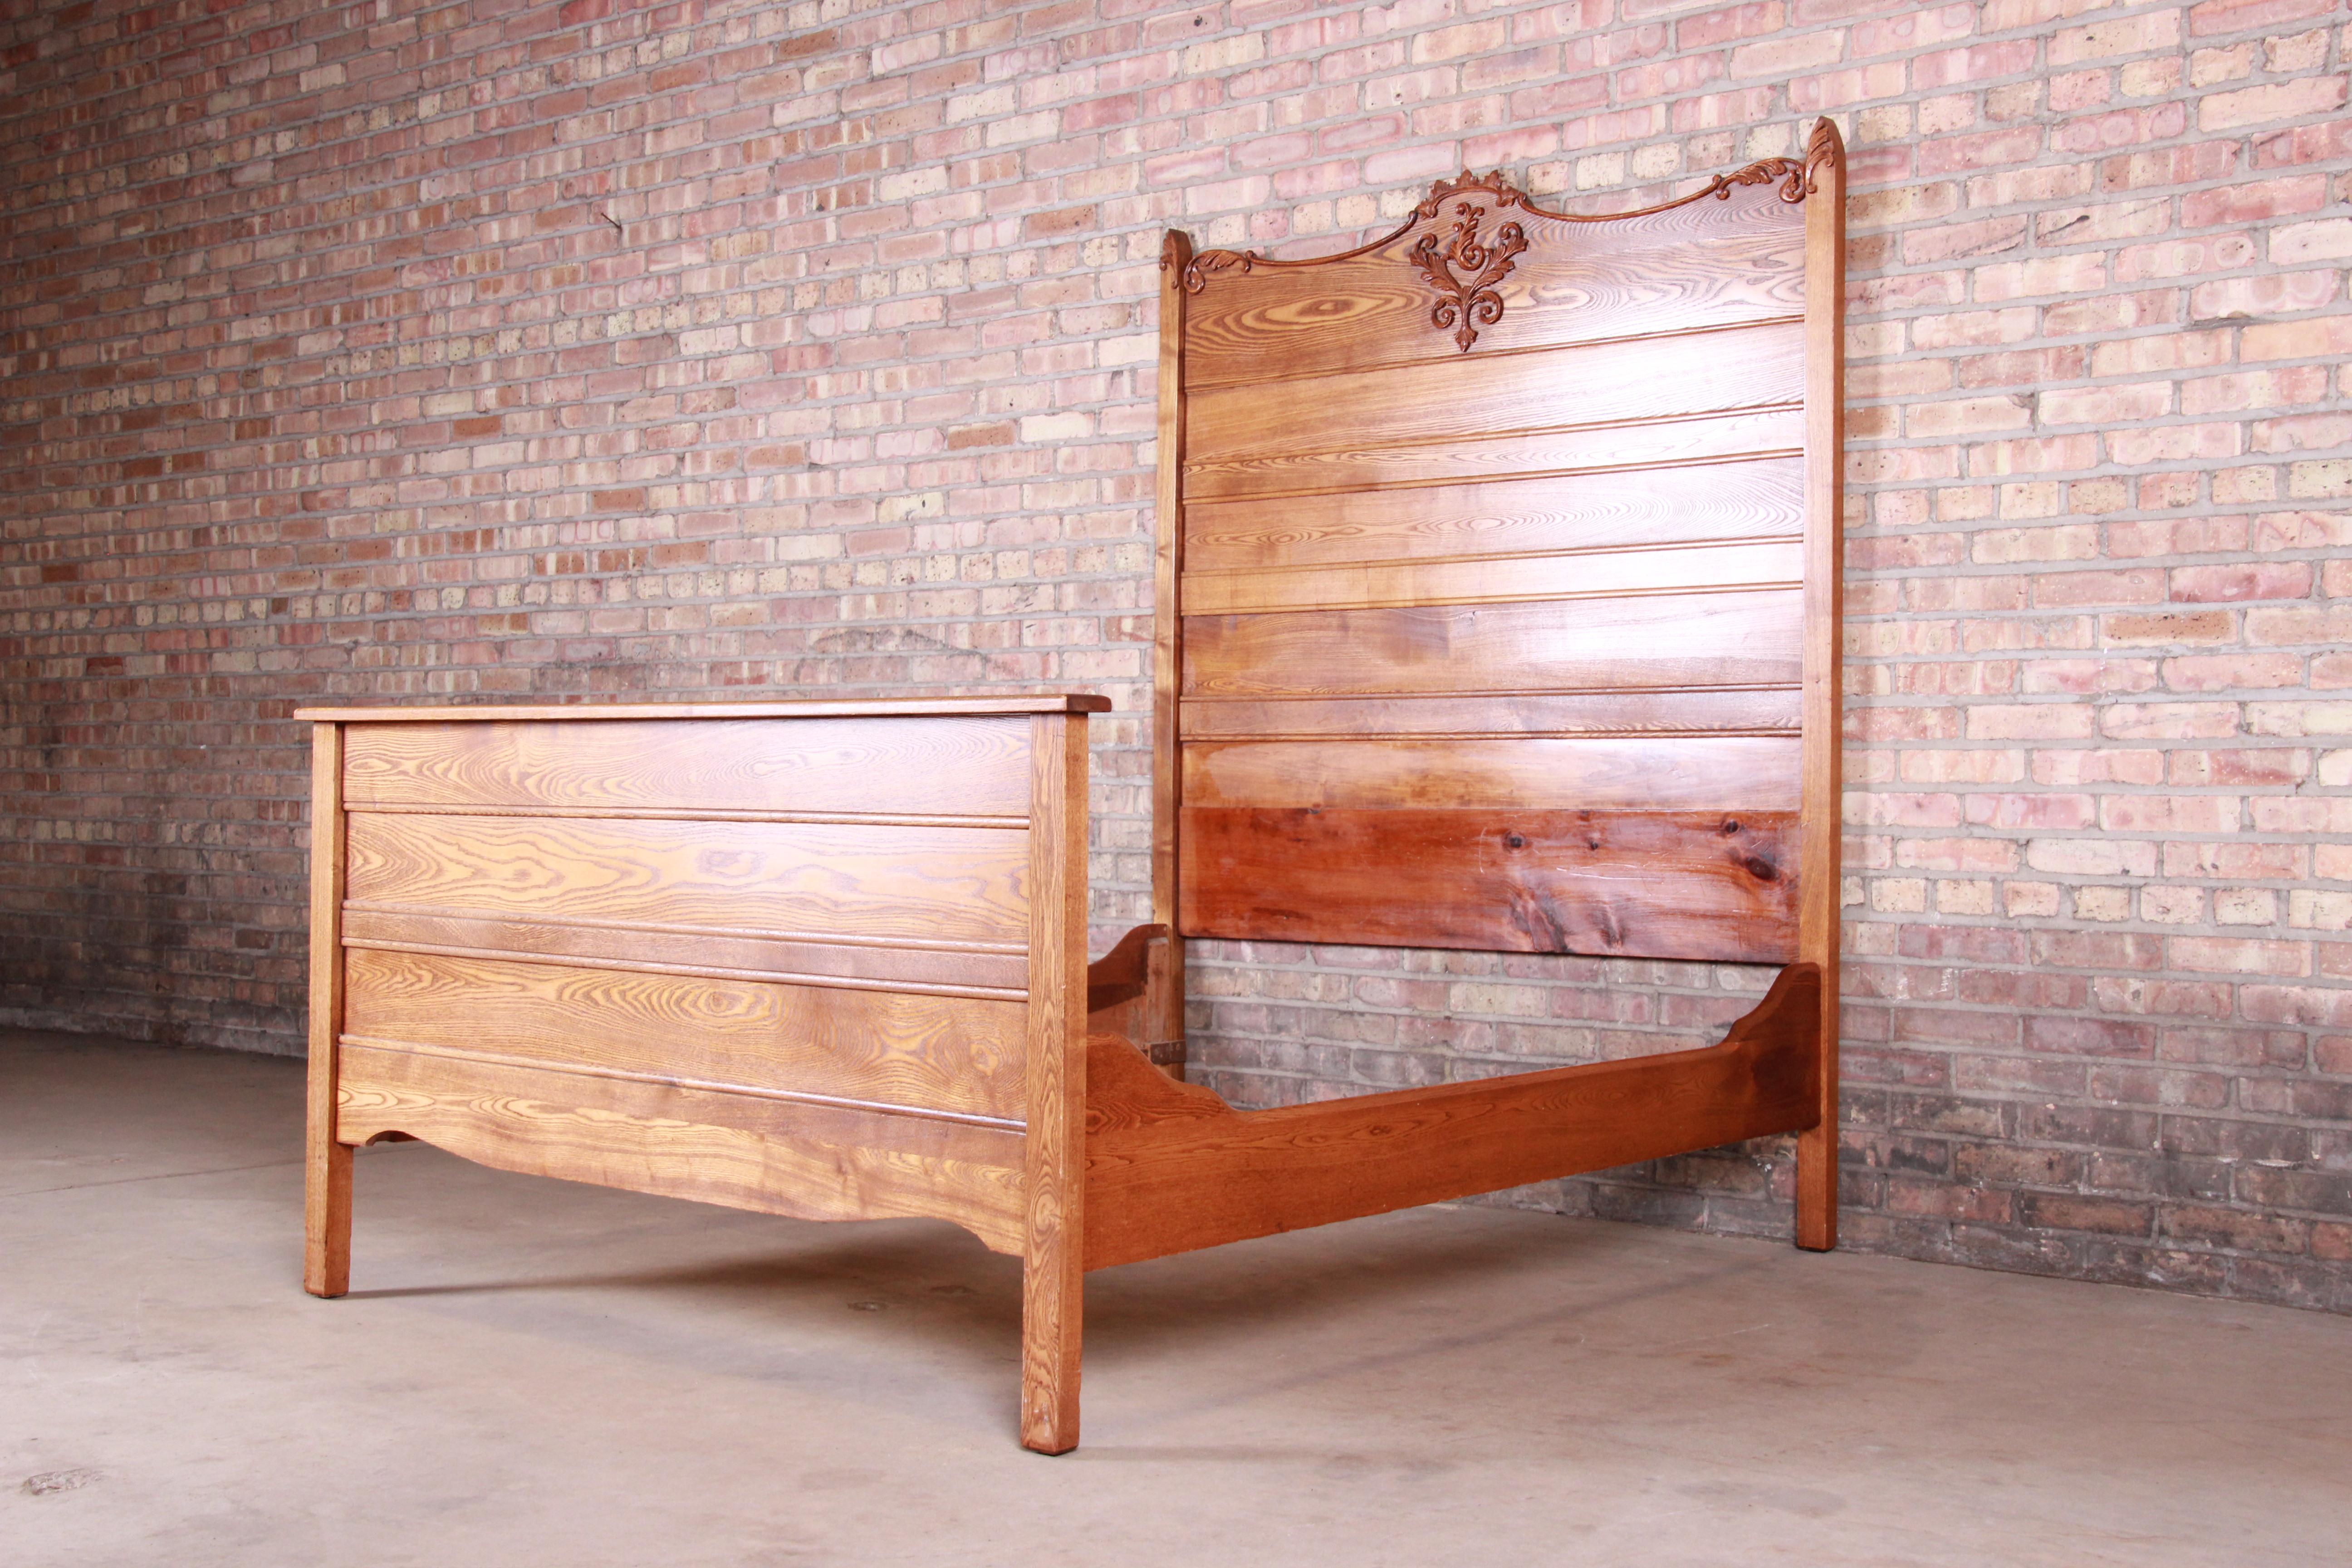 A gorgeous antique carved oak full size bed frame

USA, circa 1900

Measures: 58.13